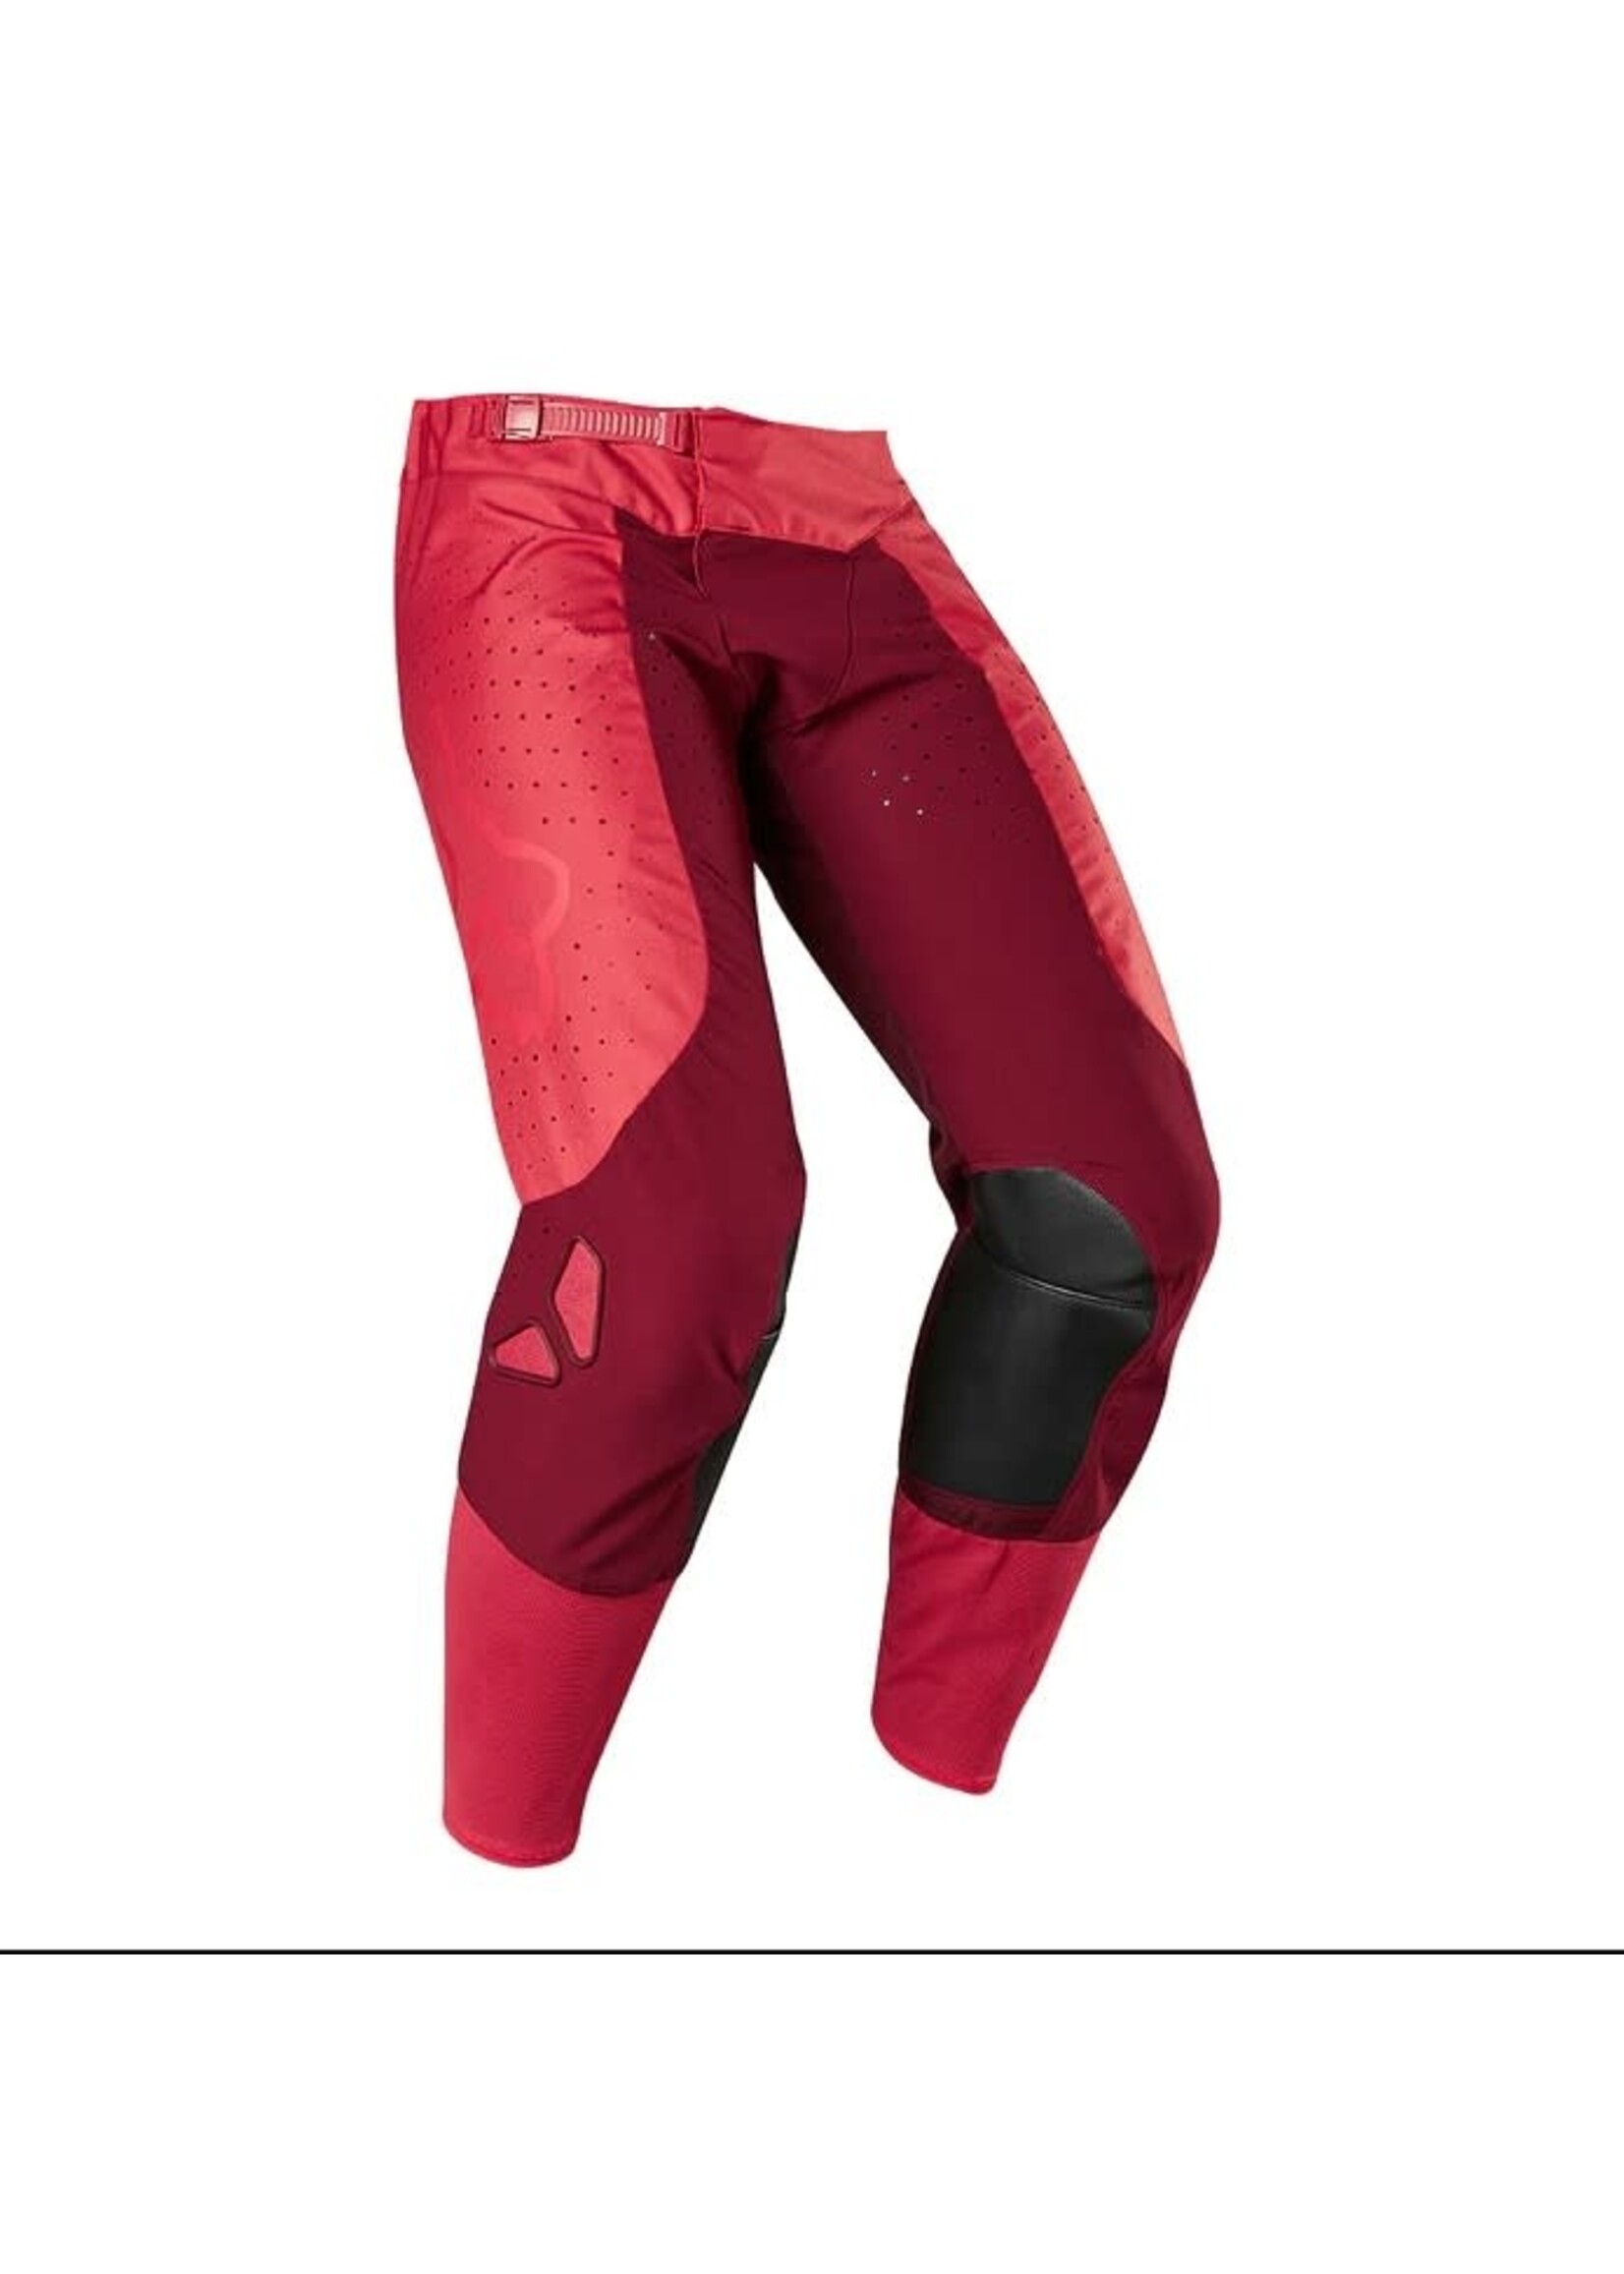 FOX RACING AIRLINE PANT, RED